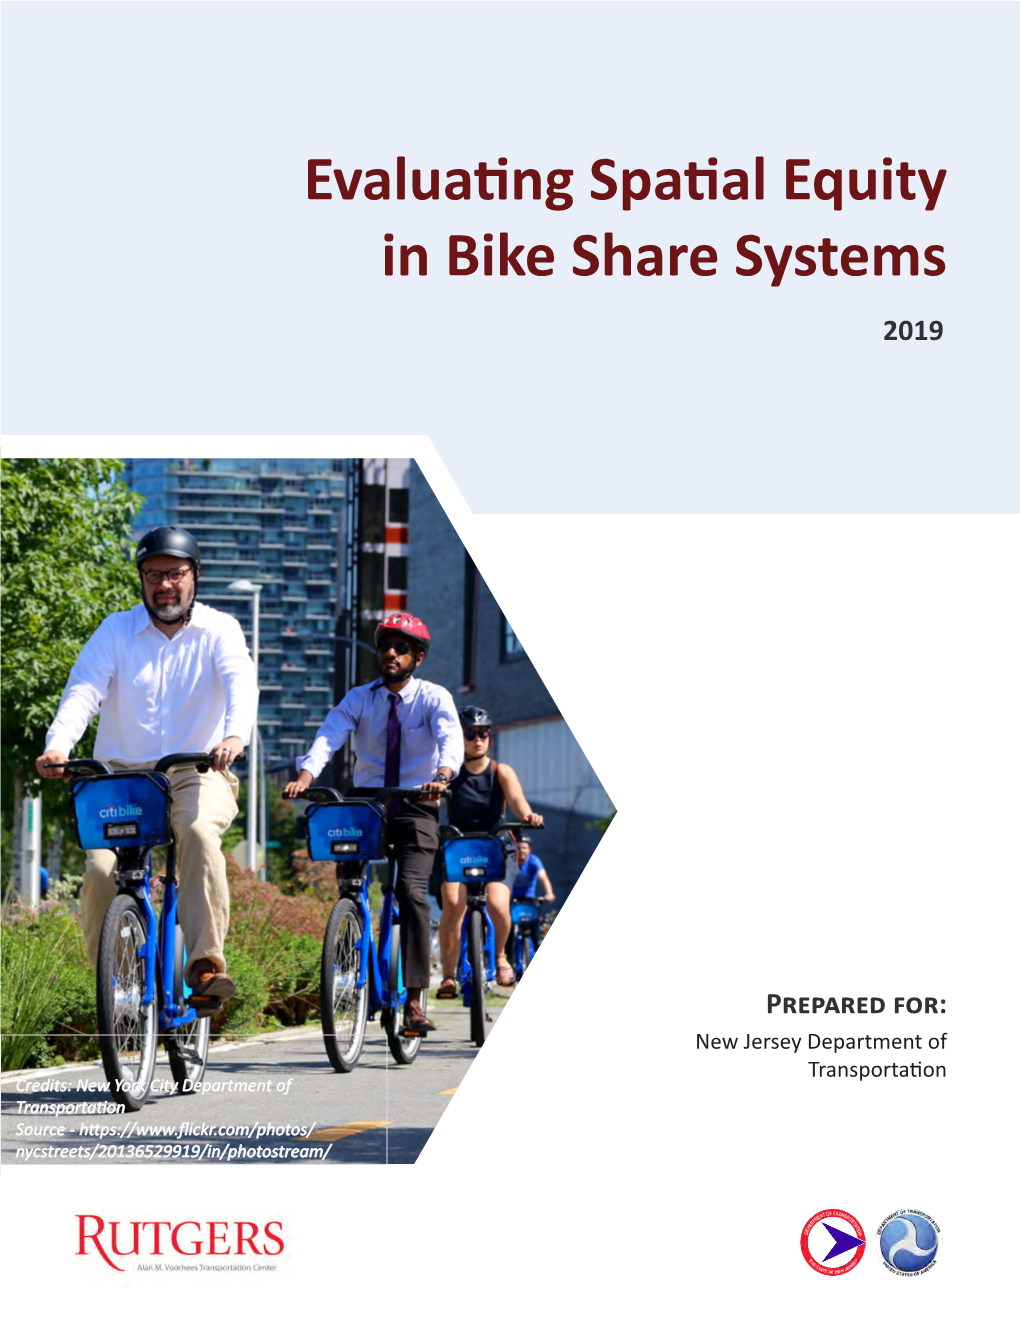 Evaluating Spatial Equity in Bike Share Systems 2019